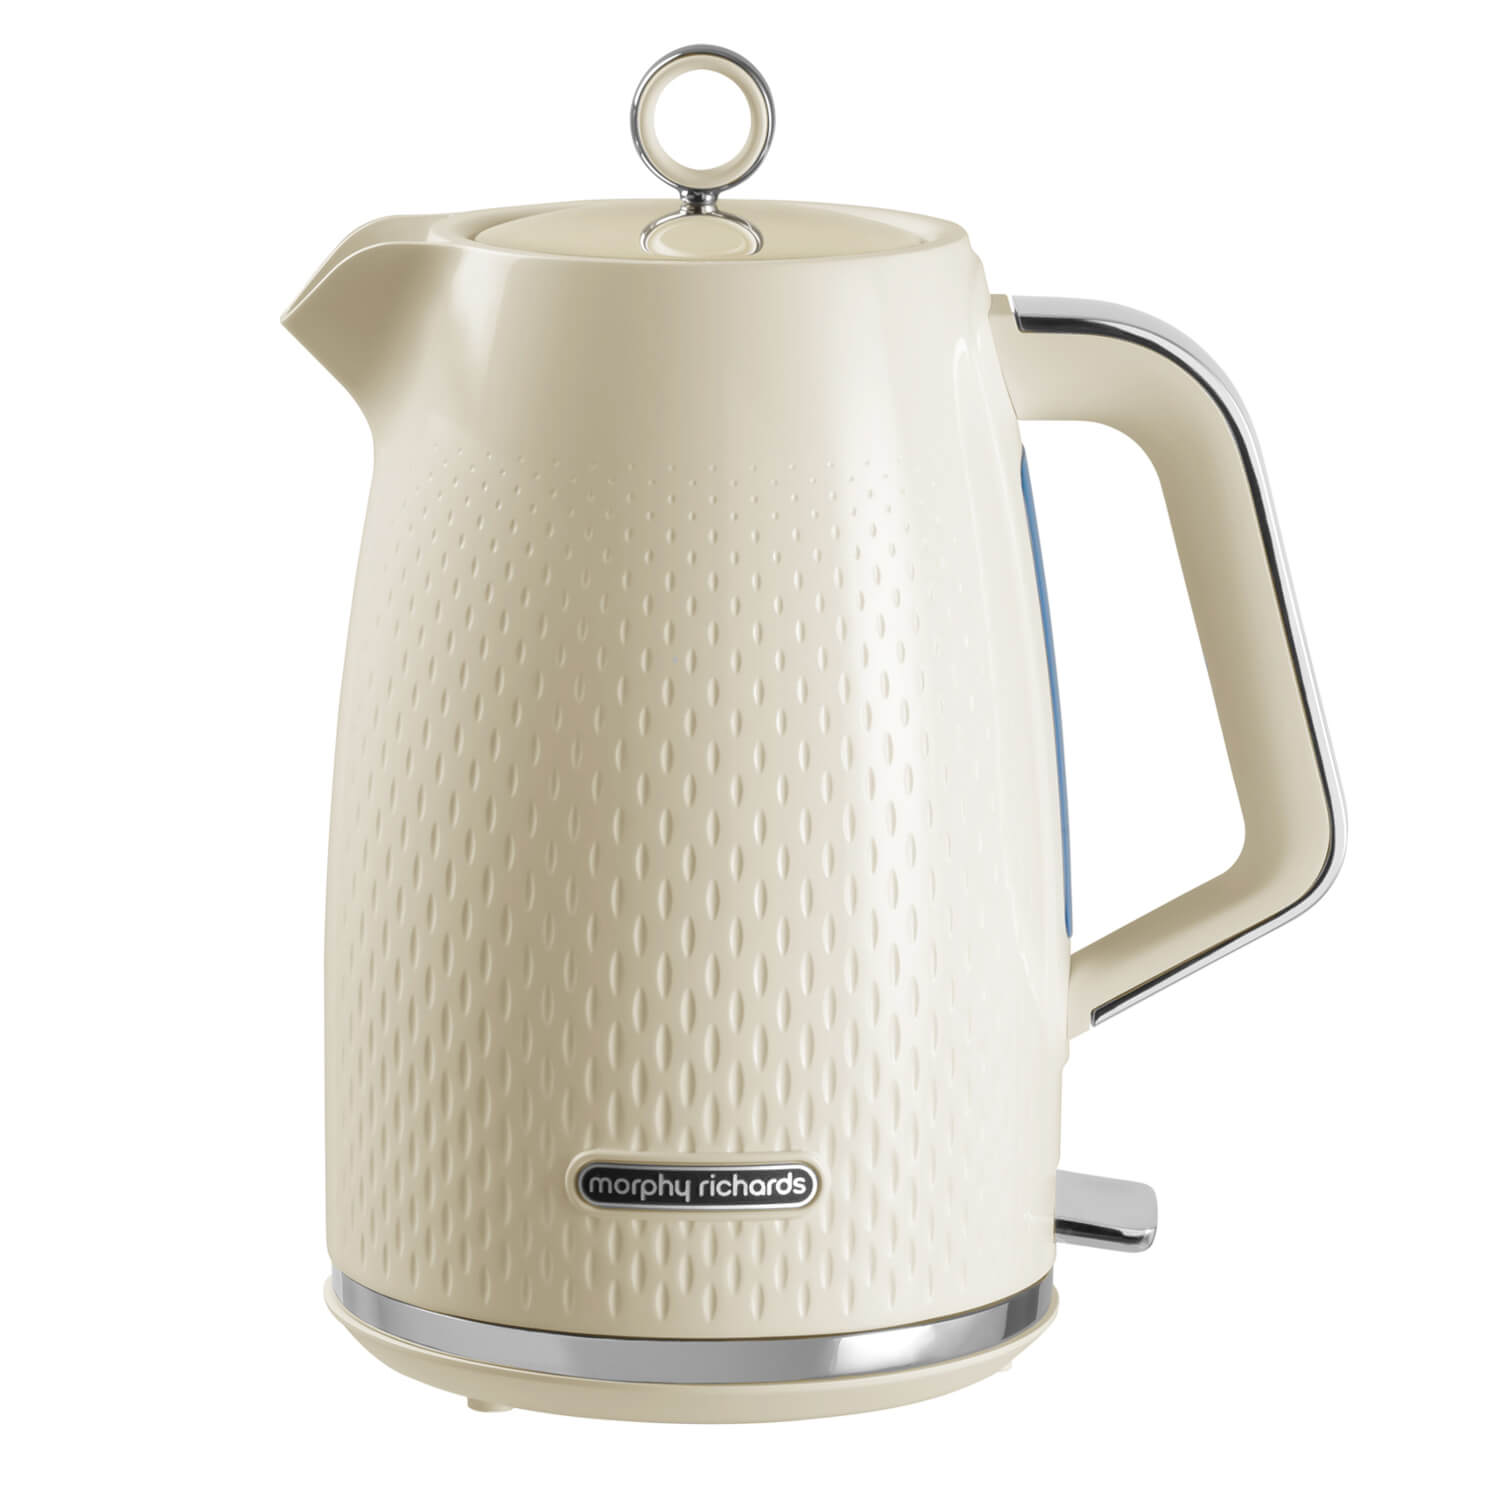 Morphy Richards Verve Textured Kettle 1.7L - Cream | 103011 1 Shaws Department Stores